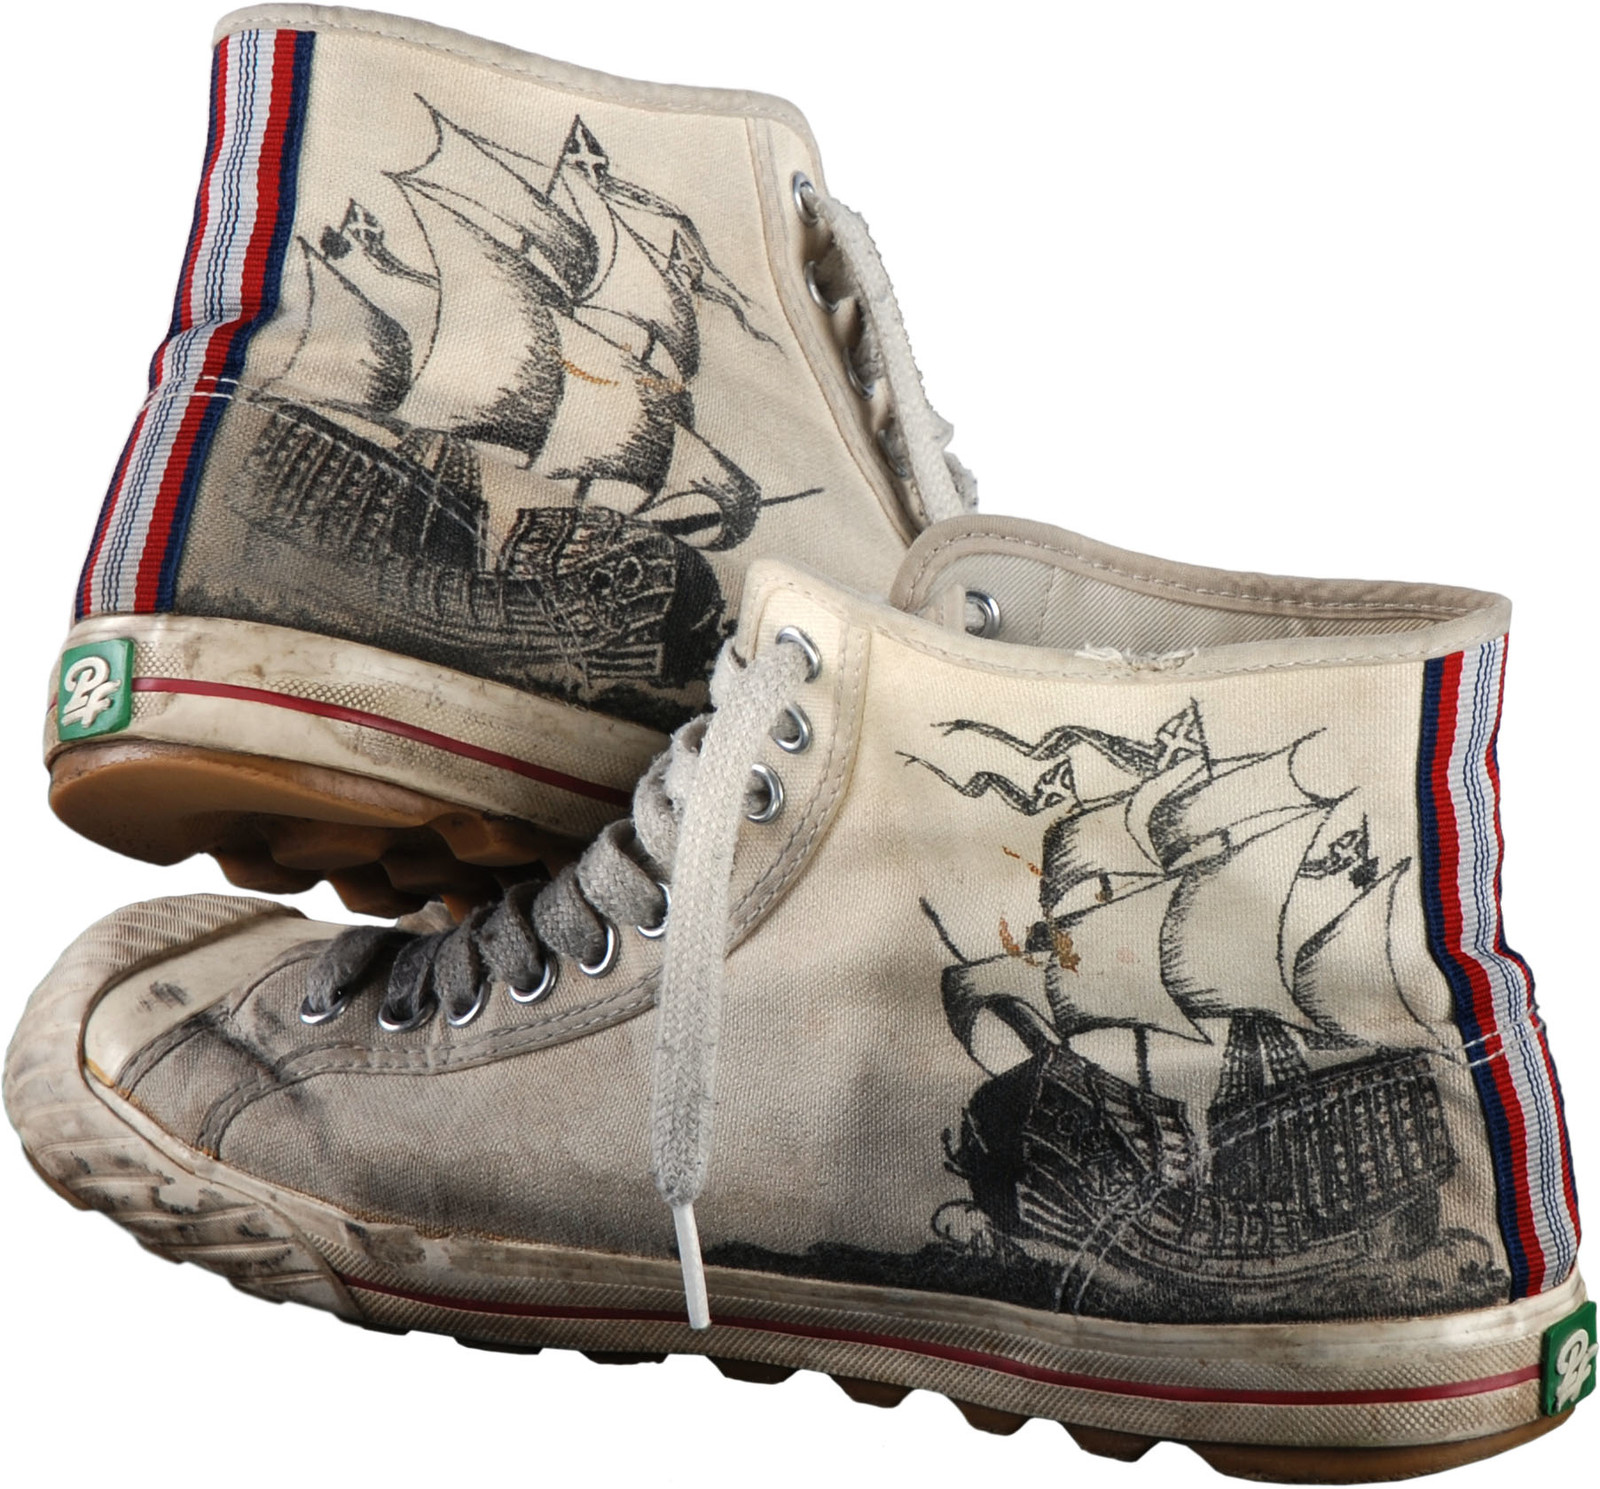 Pirate Shoes / Ink on Fabric